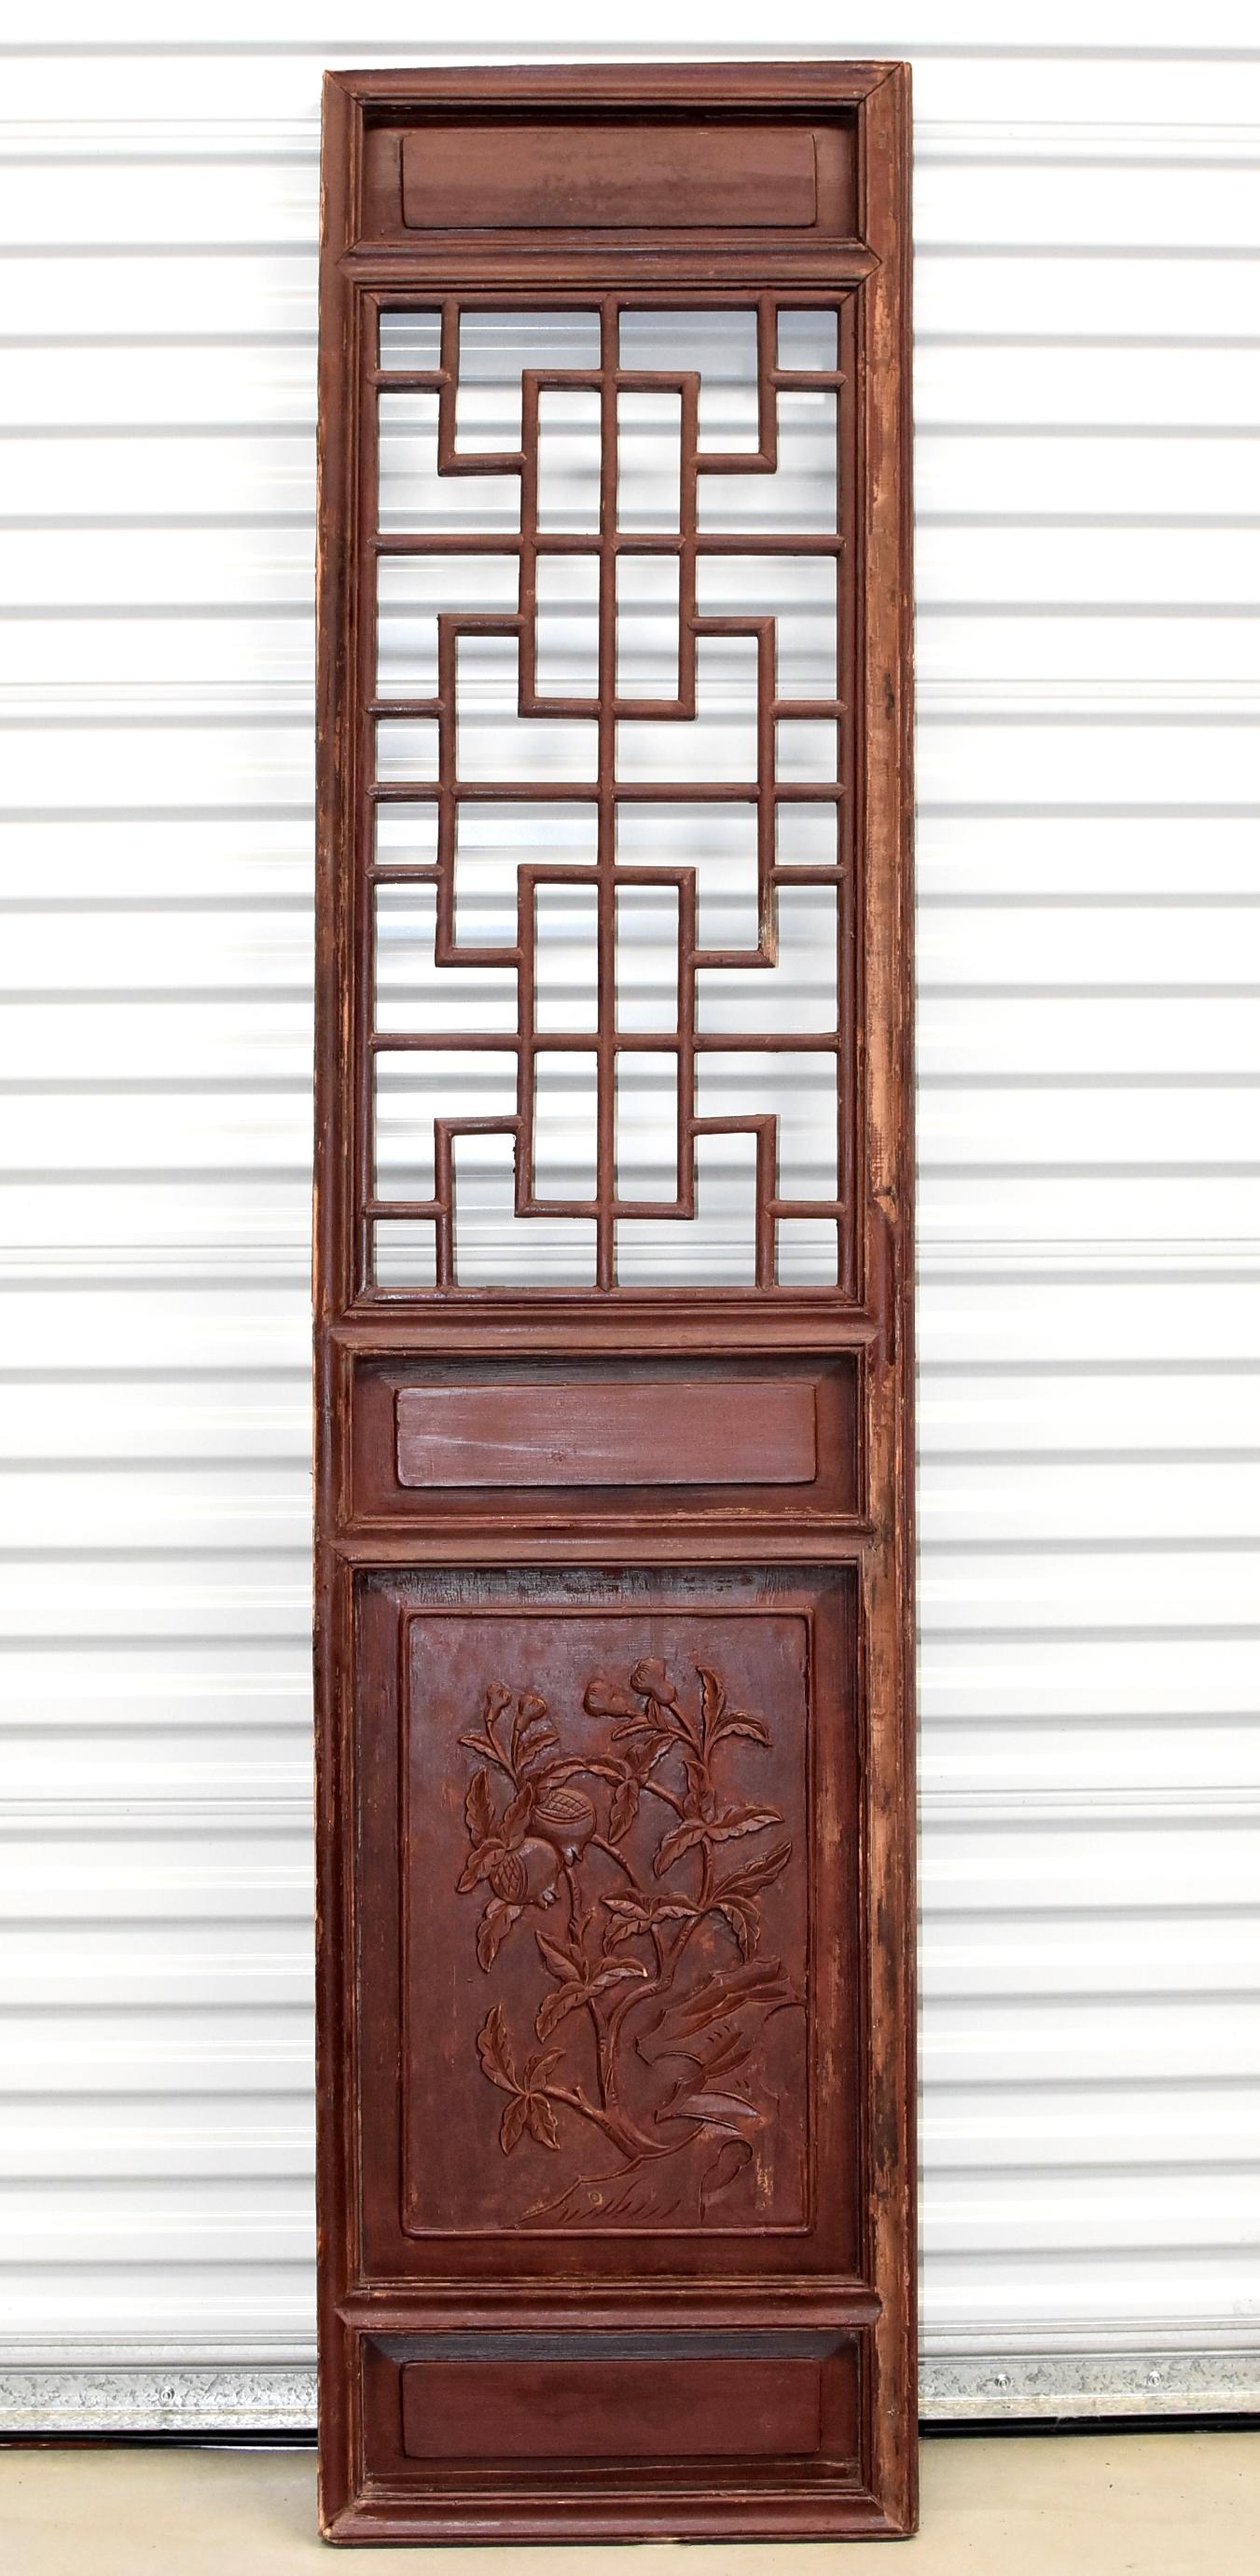 This is a set of beautiful, early 20th century Chinese antique door screens. The top section is formed by a Chinese longevity pattern, which are created by joining custom-cut pieces of wood using tenons and mortises, an incredibly painstaking